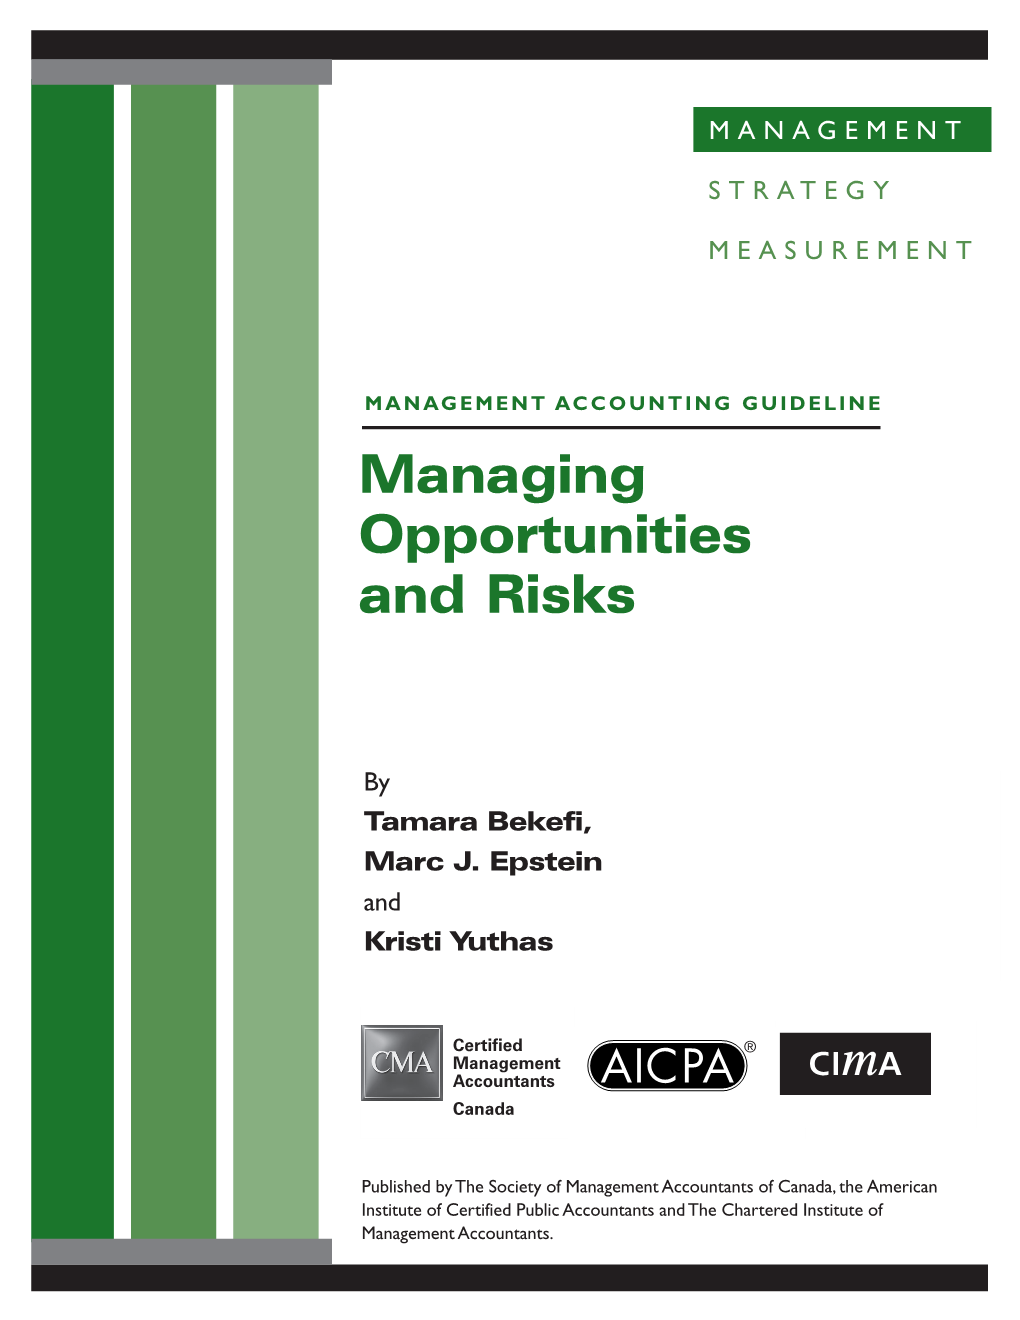 Managing Opportunities and Risks